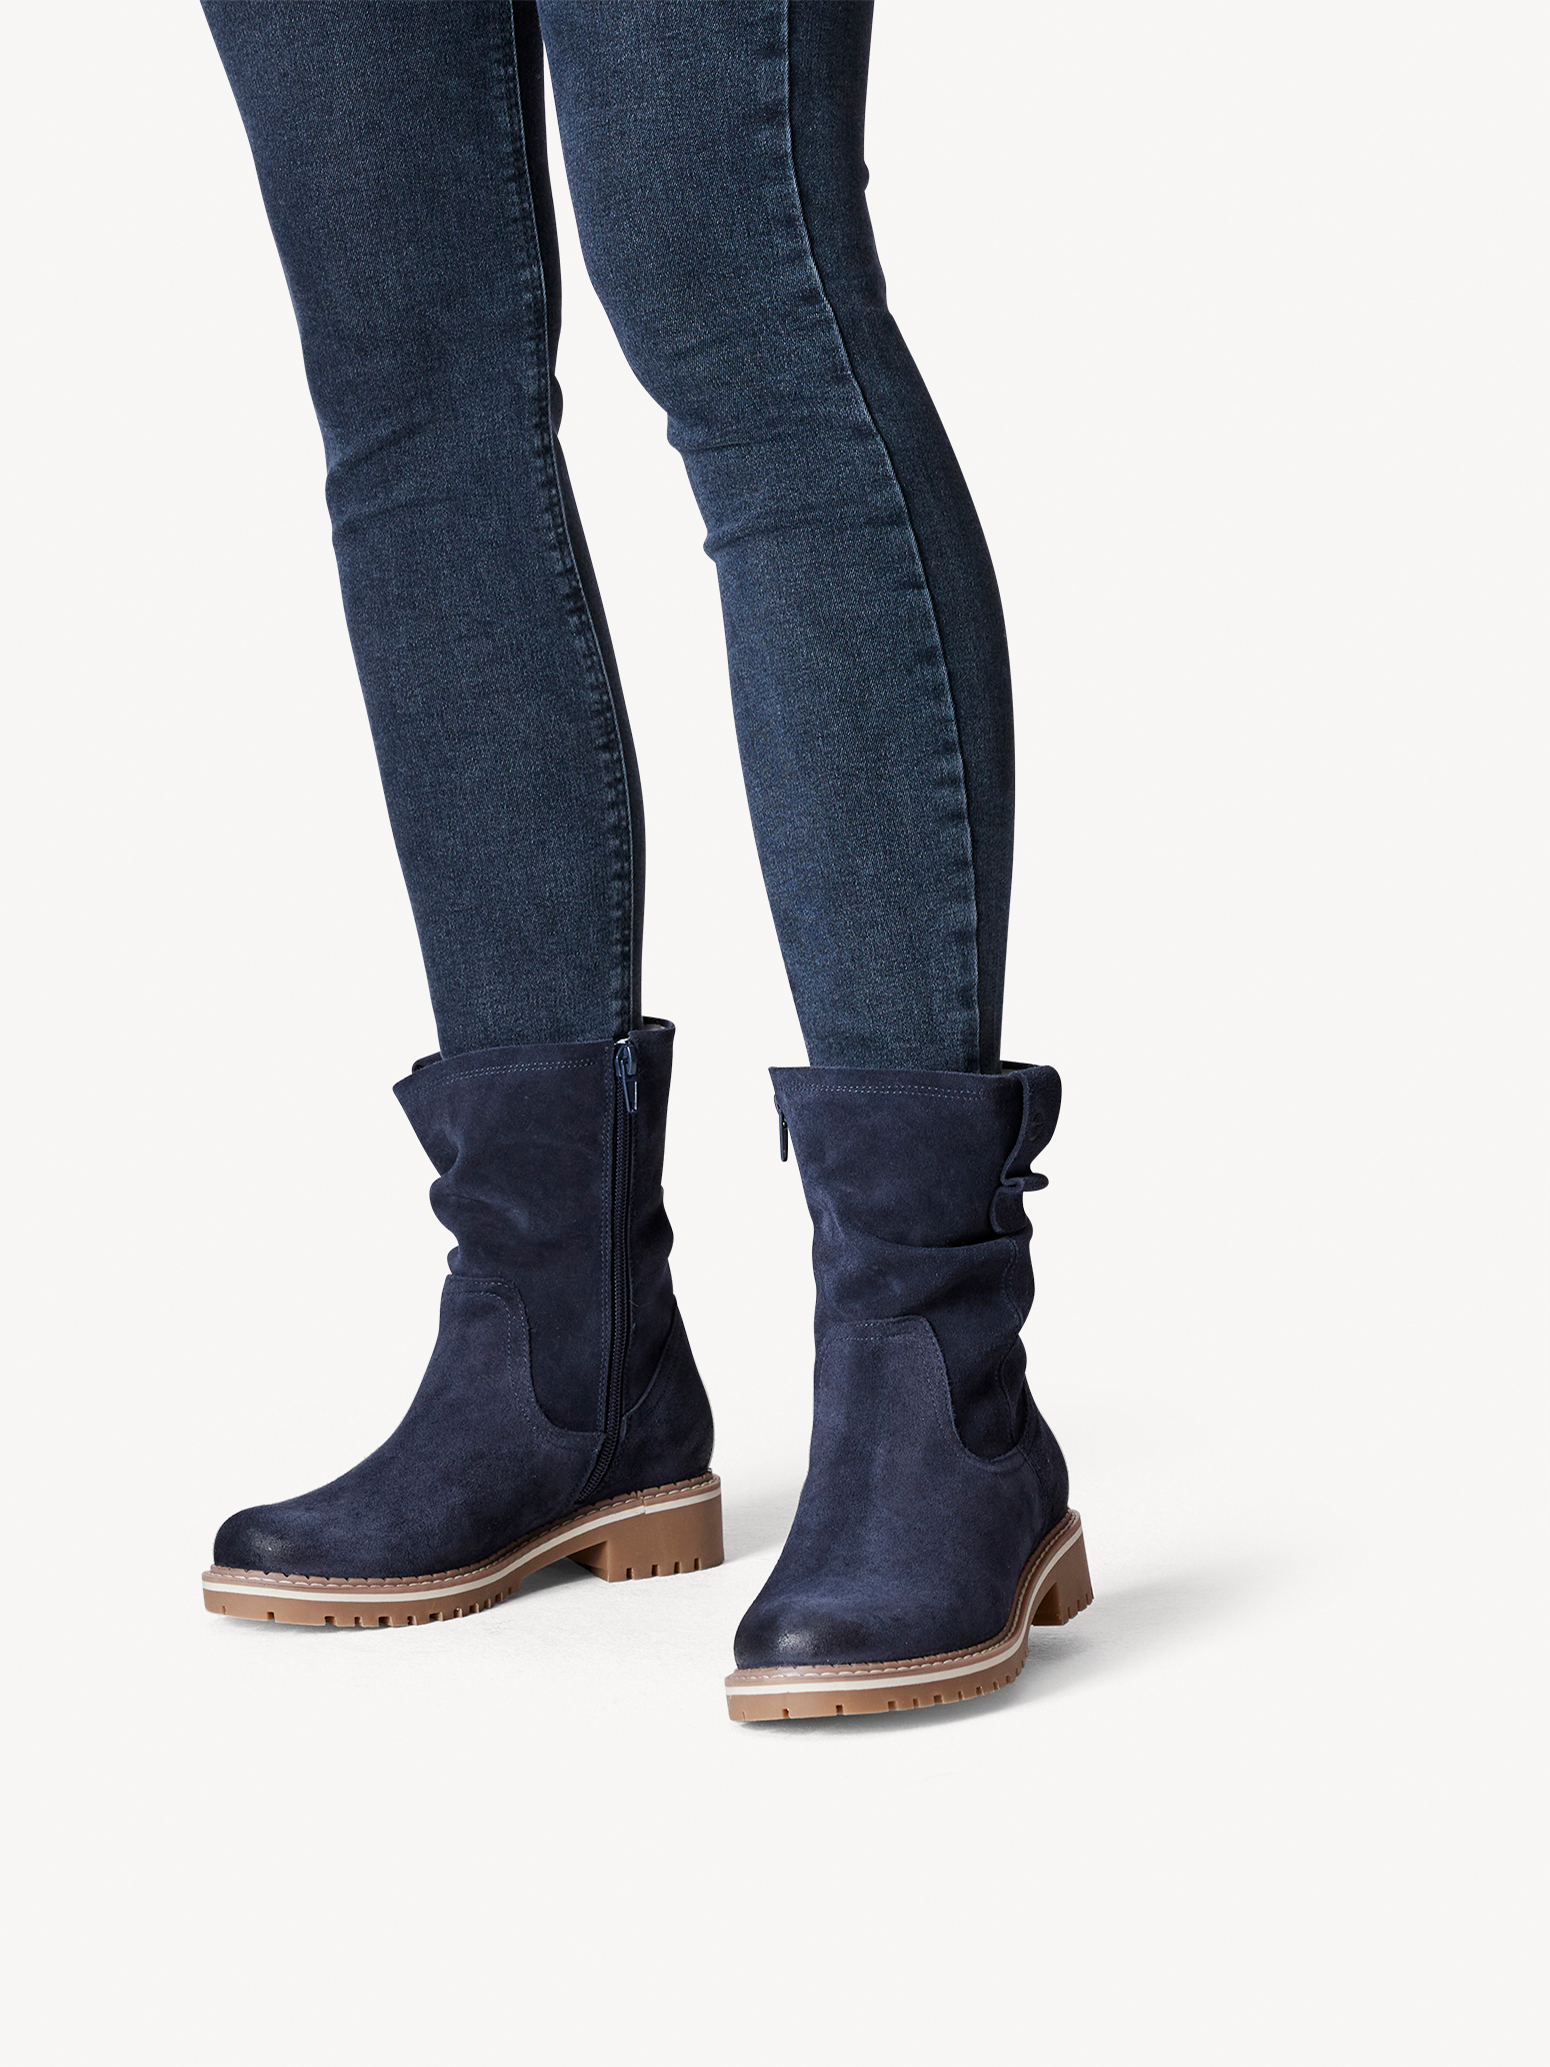 Leather Bootie - blue warm lining, NAVY, hi-res